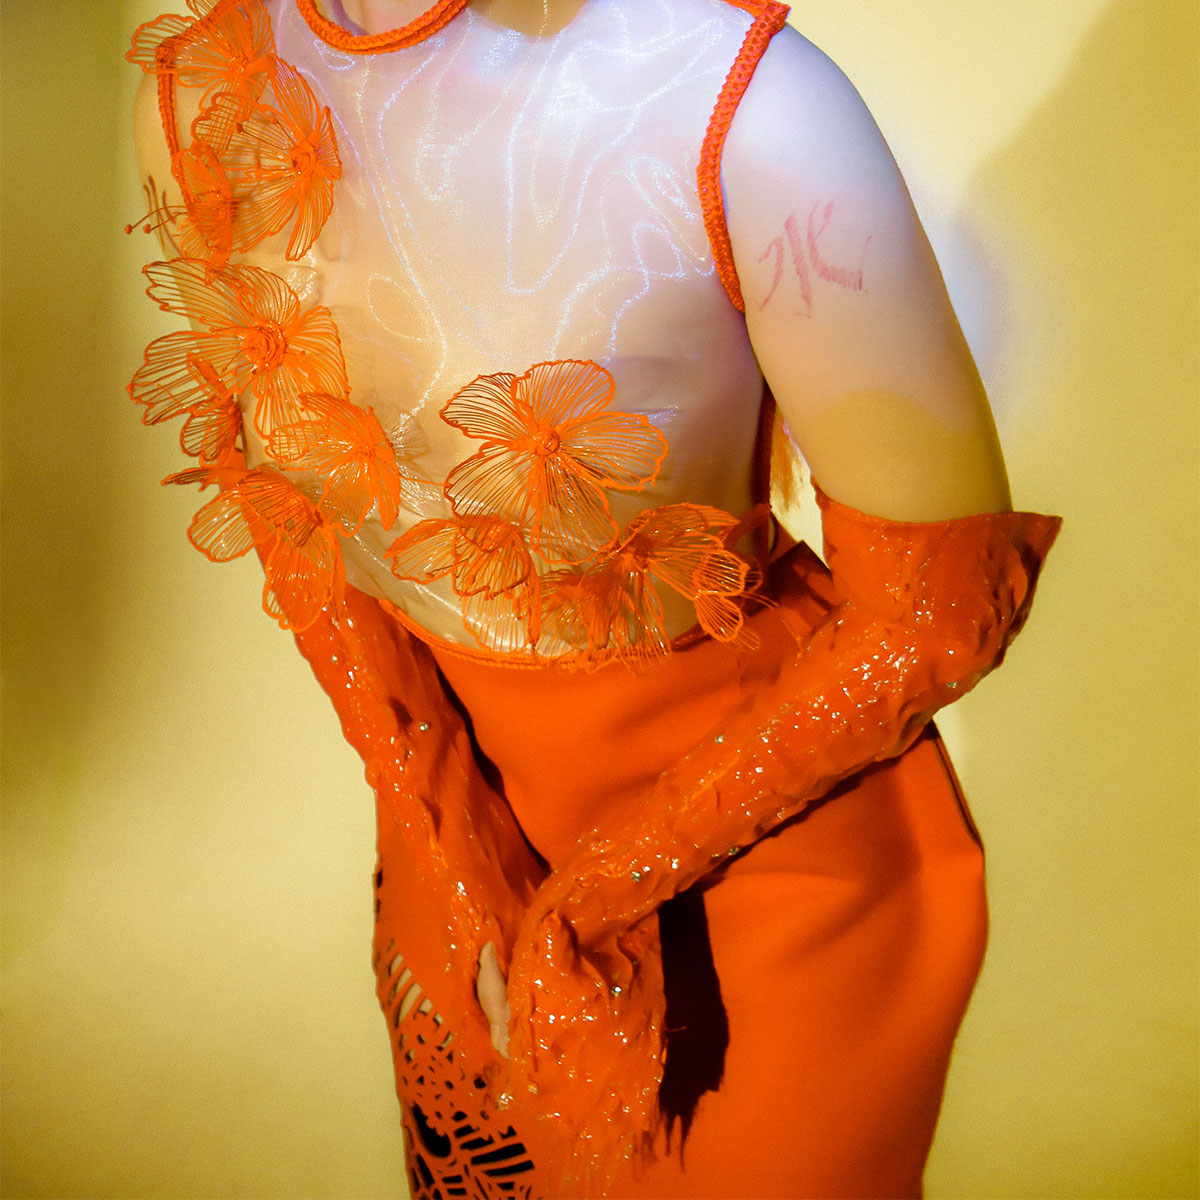 A model is wearing a bright oragne garment with see-through panels and orange vinyl gloves. The model is slightly leading forward with theor hands in front of their lower torso, in front of a yellow backdrop.